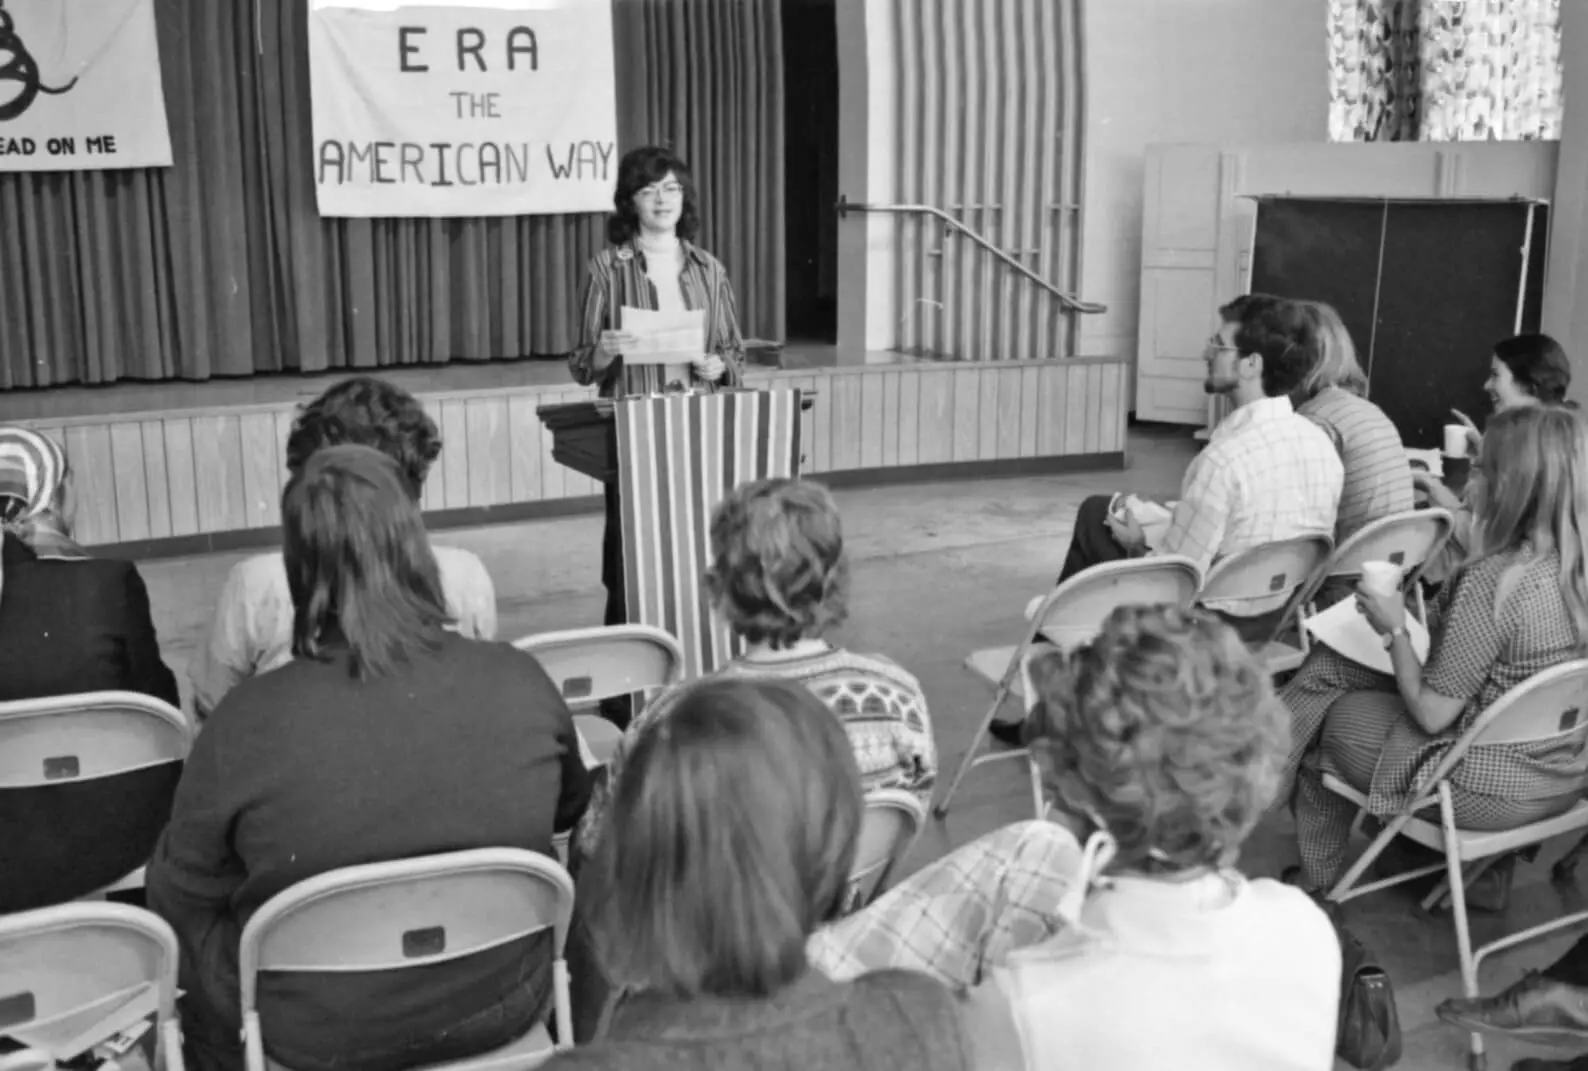 Black and white photo of a white woman standing at a podium in front of a small audience.